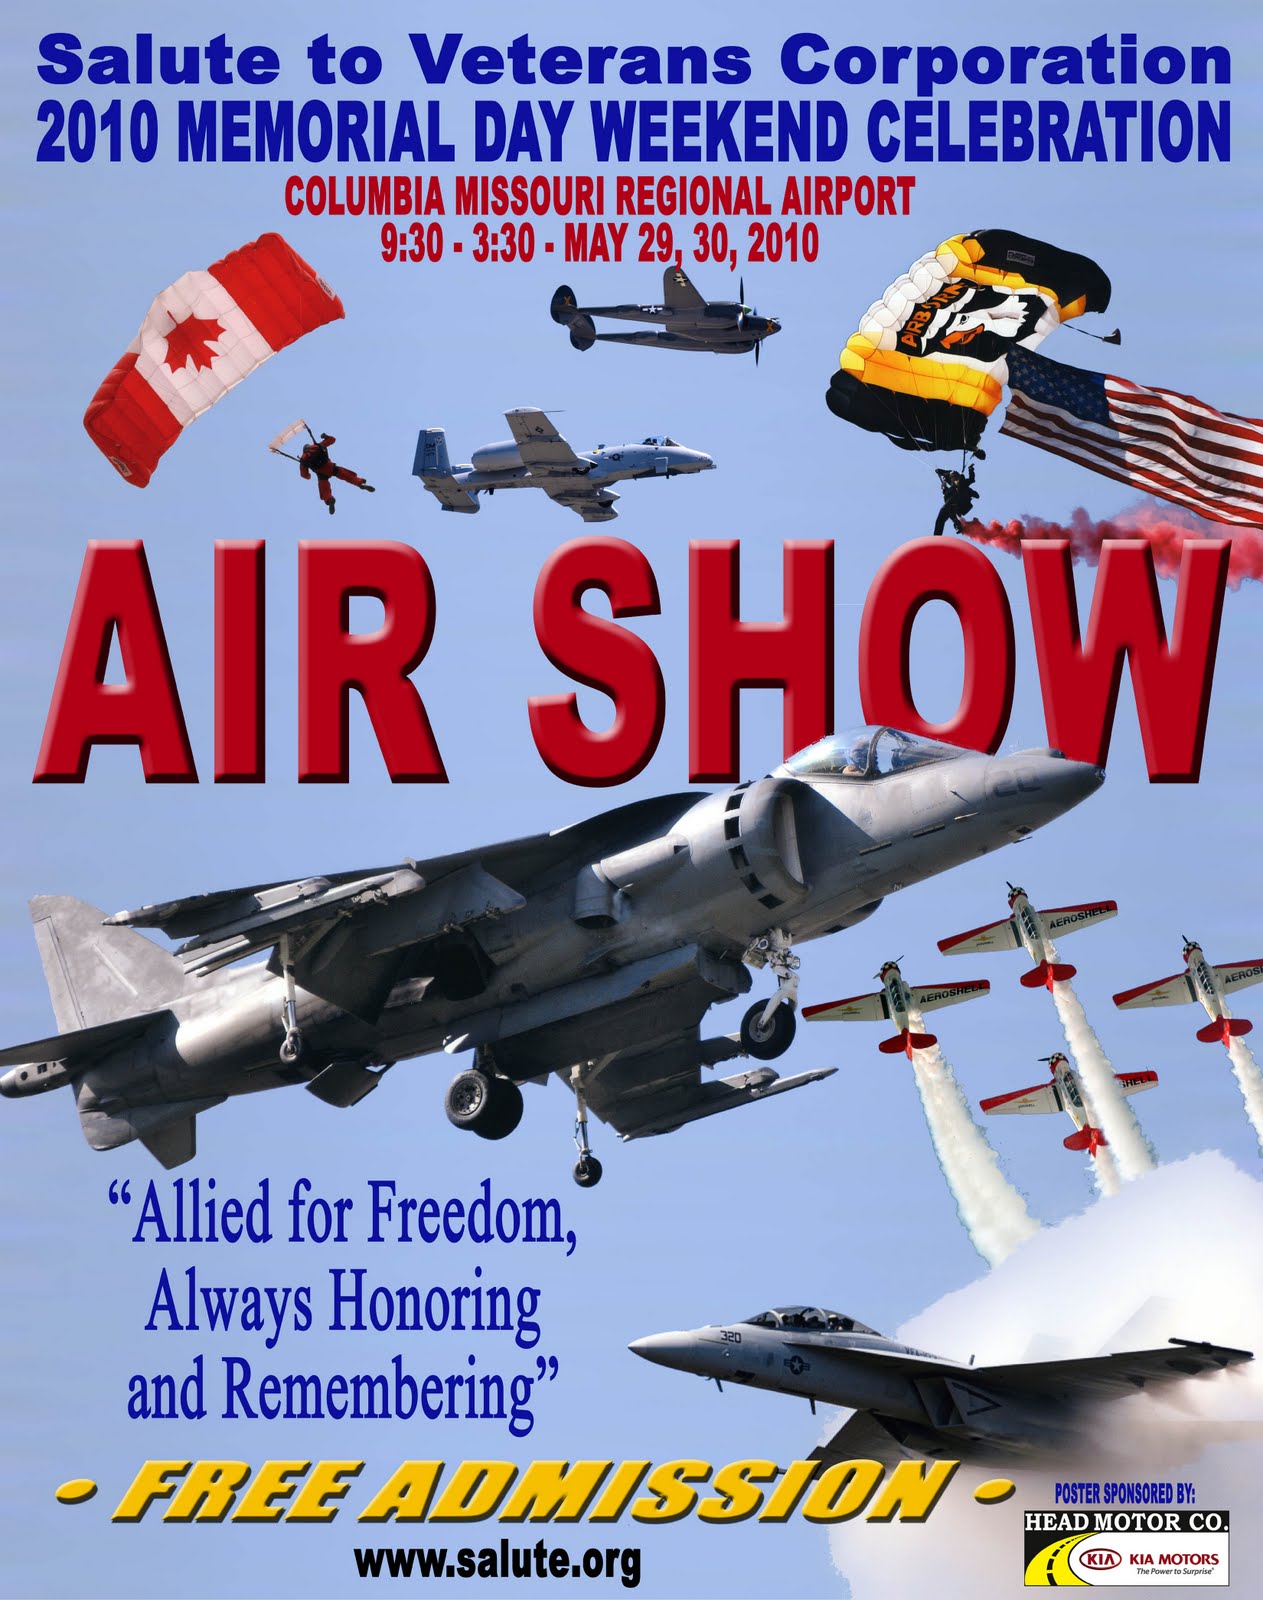 Memorial Day Salute to Veterans Corporation Air Show - Let's Have a Great